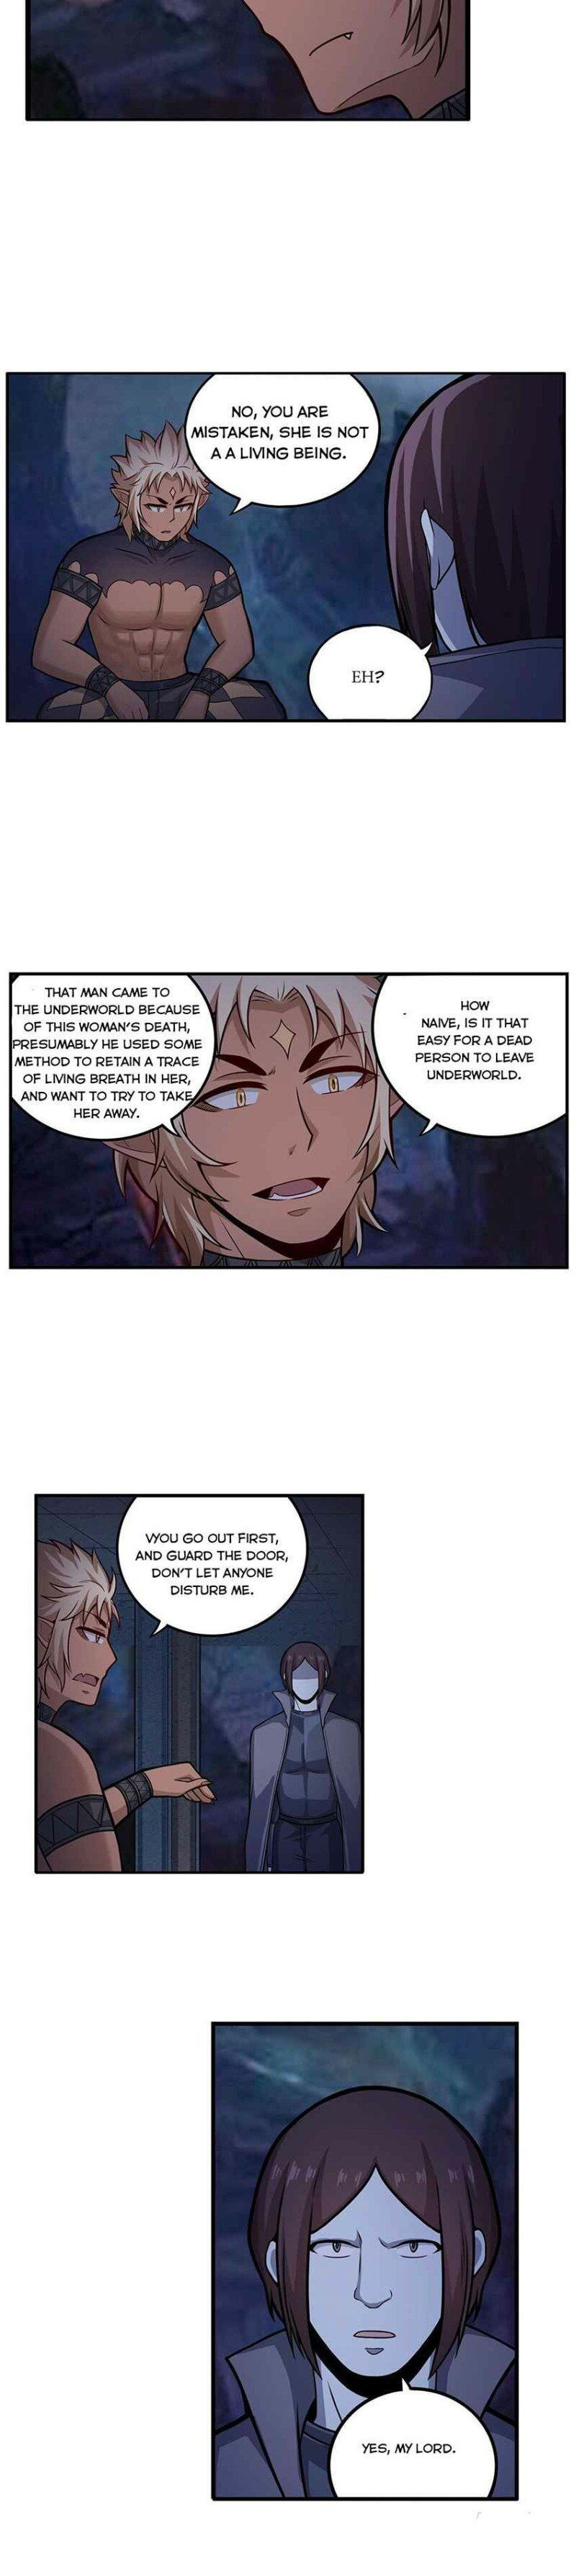 Infinite Apostles and Twelve War Girls Chapter 204 page 2